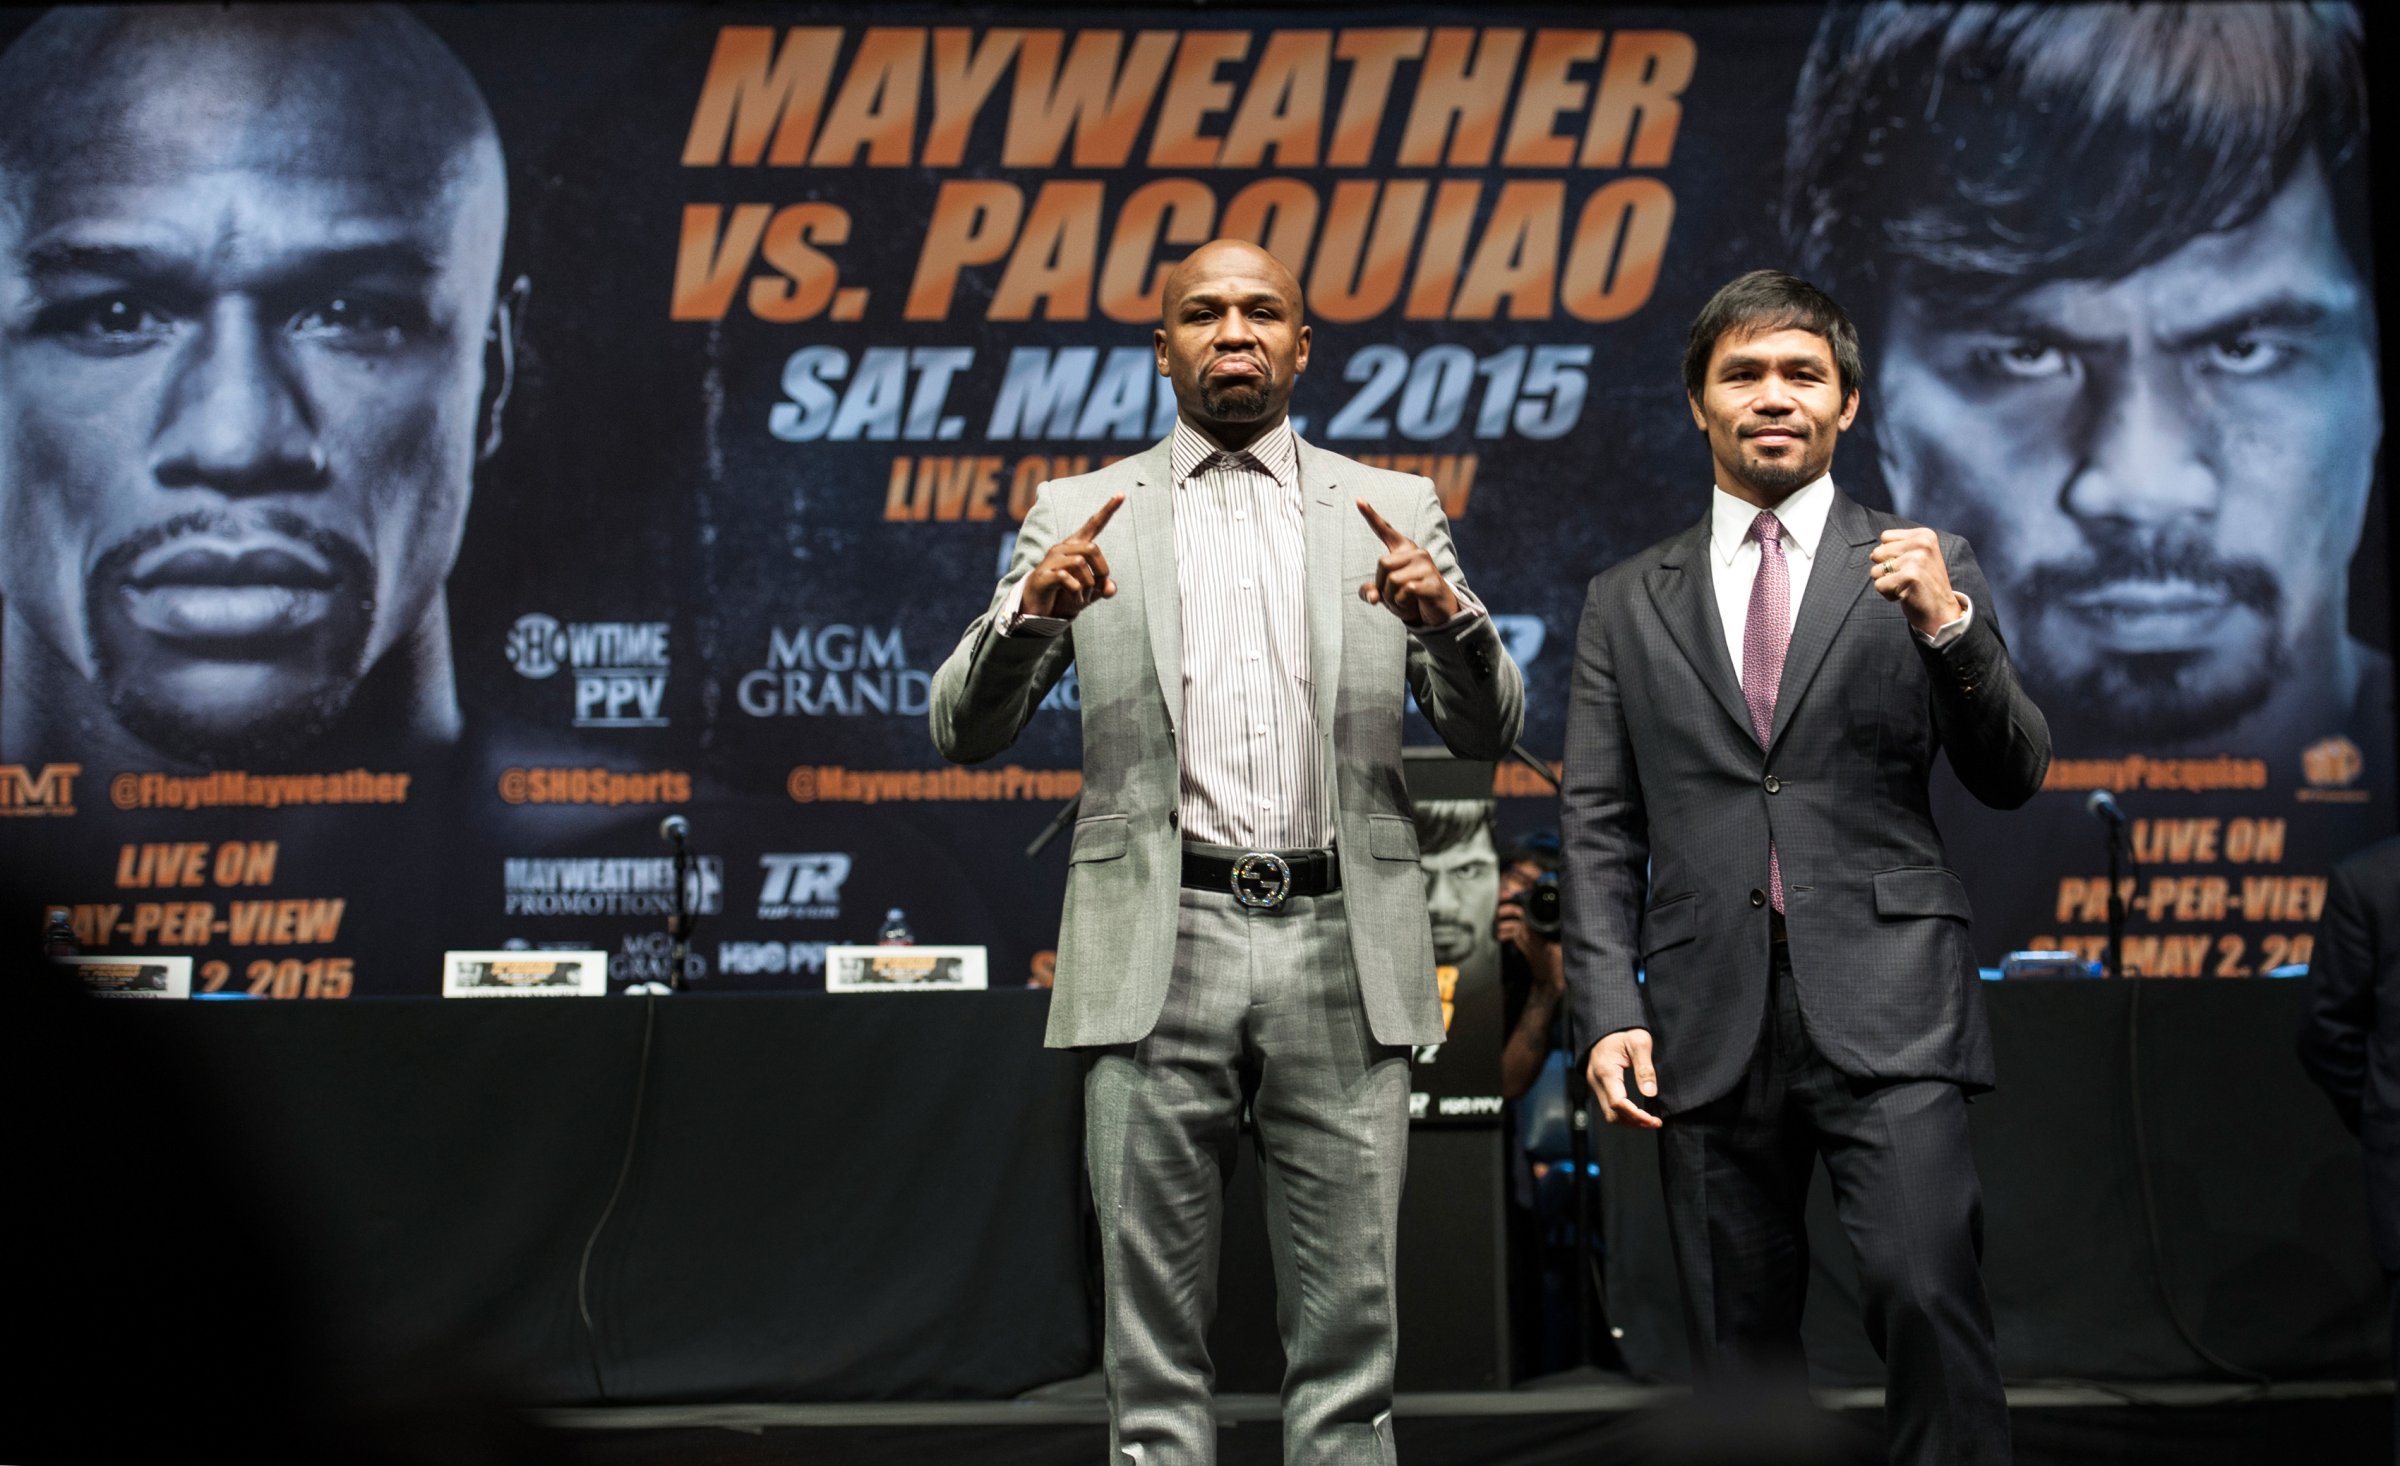 Floyd Mayweather Jr., and Manny Pacquiao strike their pose after a news conference Wednesday, March 11, 2015, in Los Angeles. Mayweather and Pacquiao are scheduled to fight on May 2 in Las Vegas.